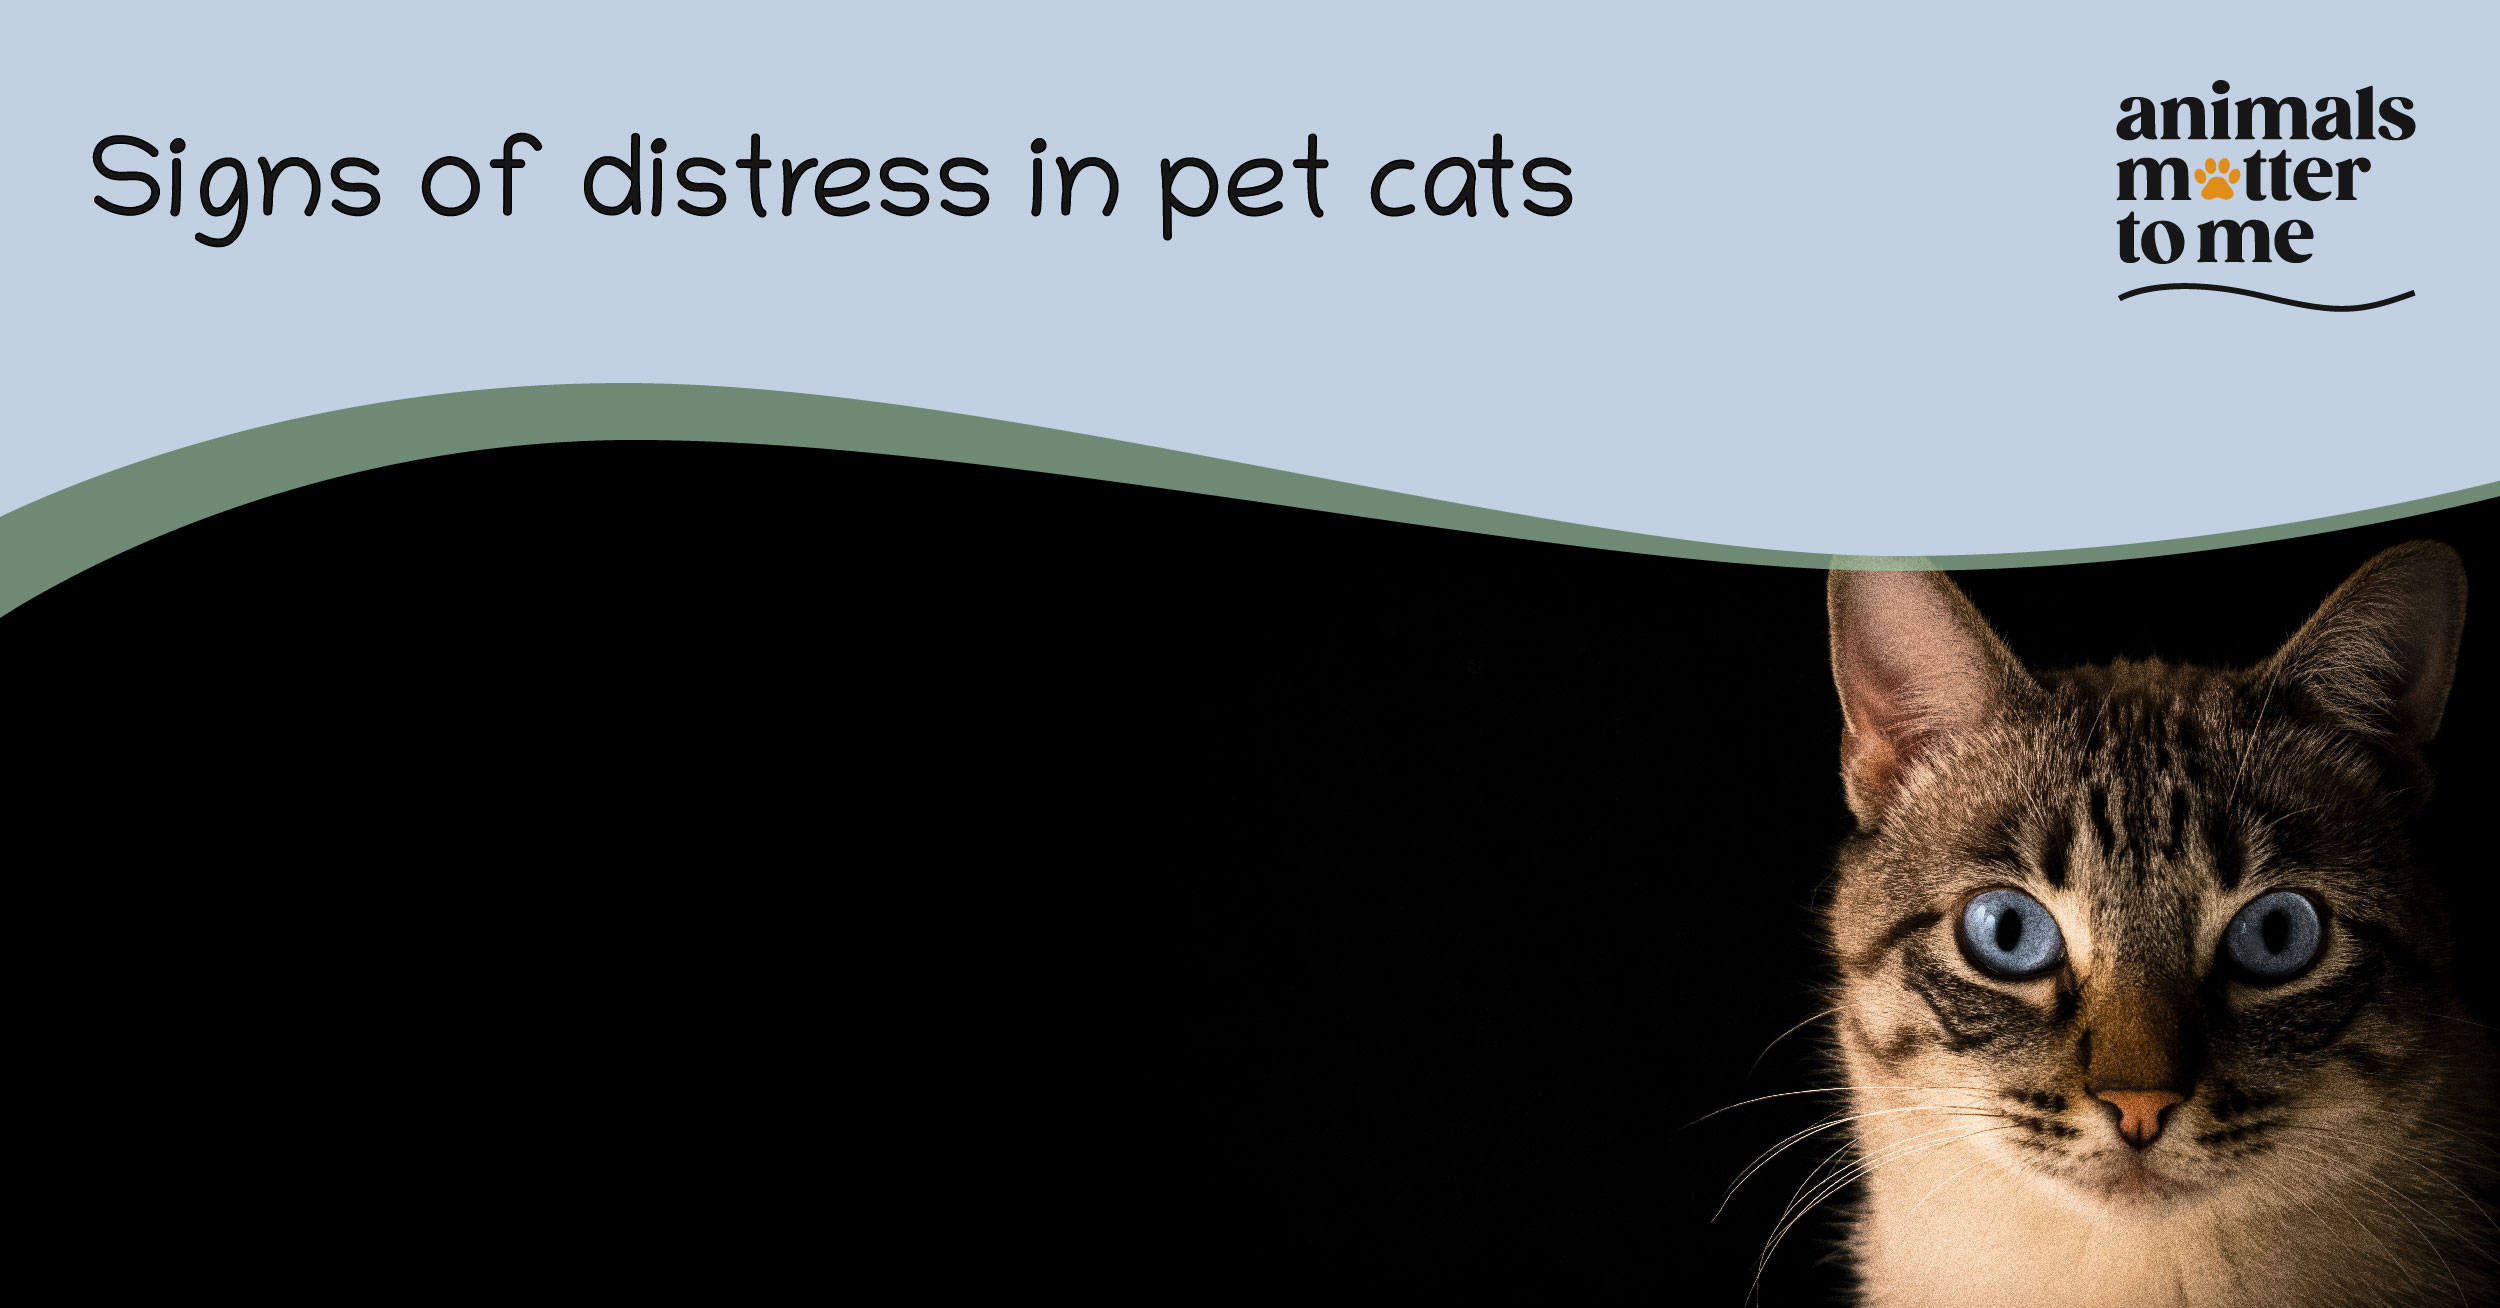 Signs of distress in pet cats - blog cover